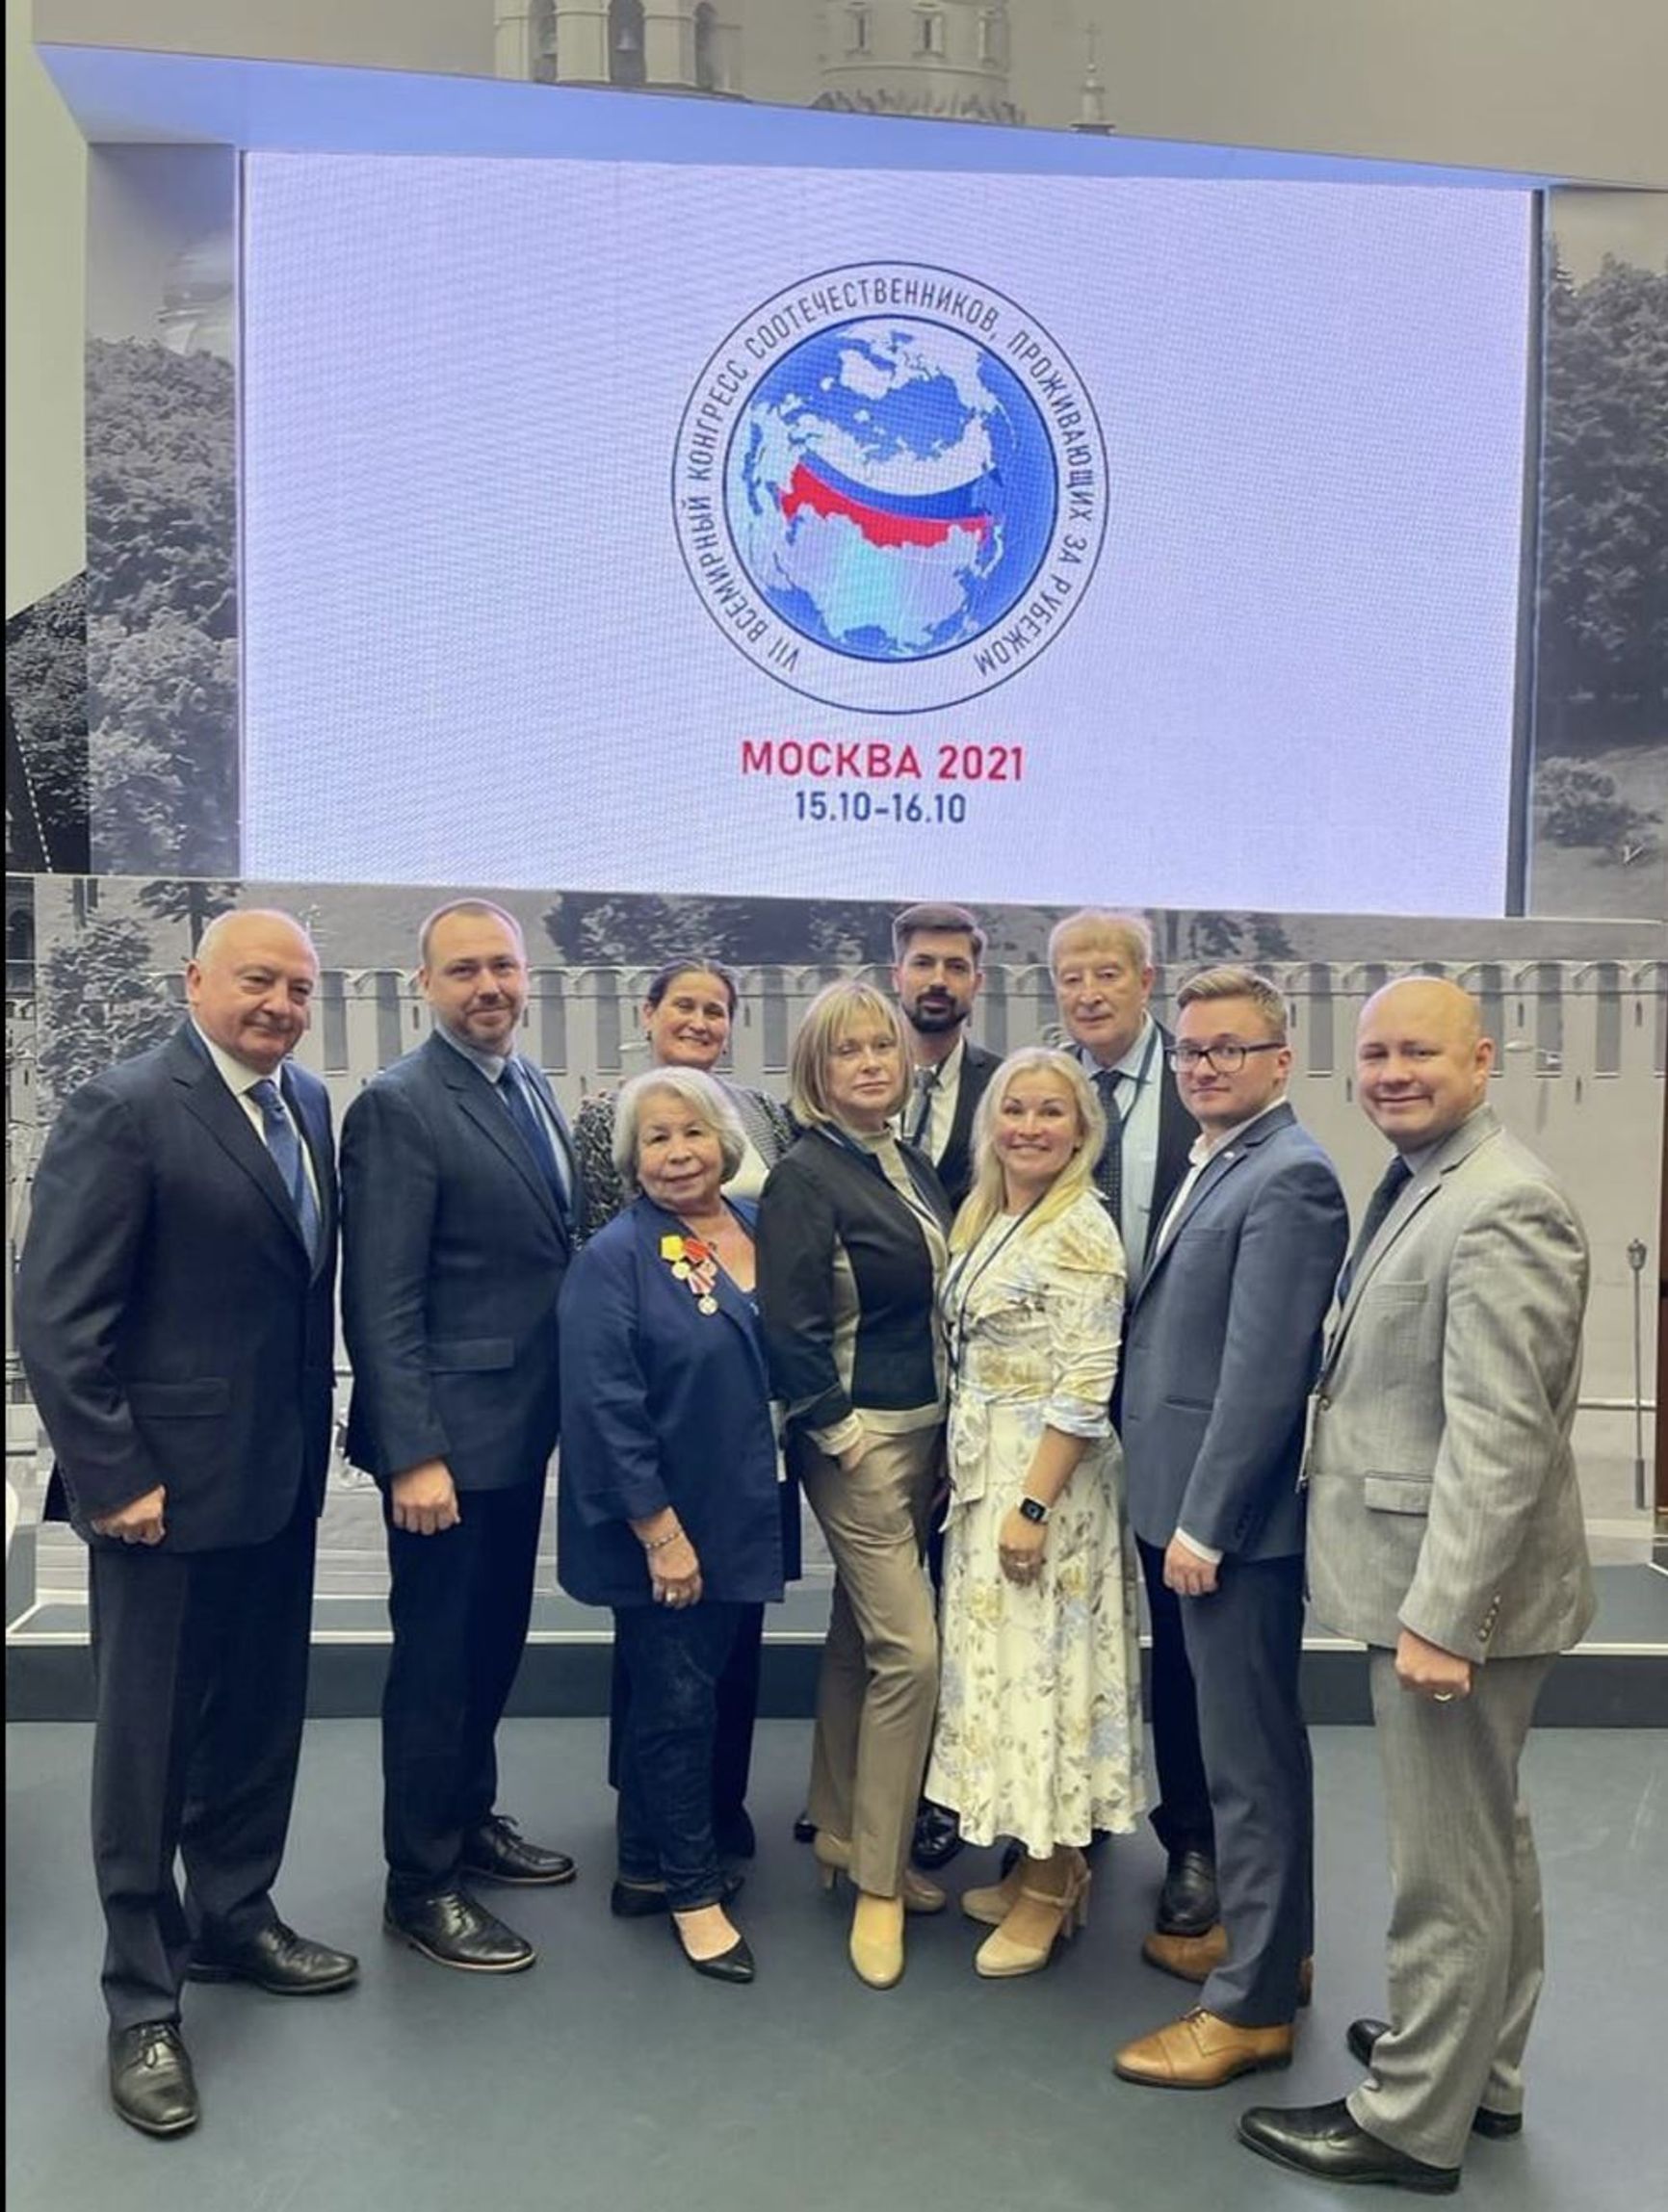 US KSORS members at the World Congress of Compatriots in Moscow in October 2021. Anton Konev followed (far right) Sergey Gladysh, Eduard Lozansky, Igor Kochan (back row from right to left), Natalia Sabelnik and Elena Branson (front row center)